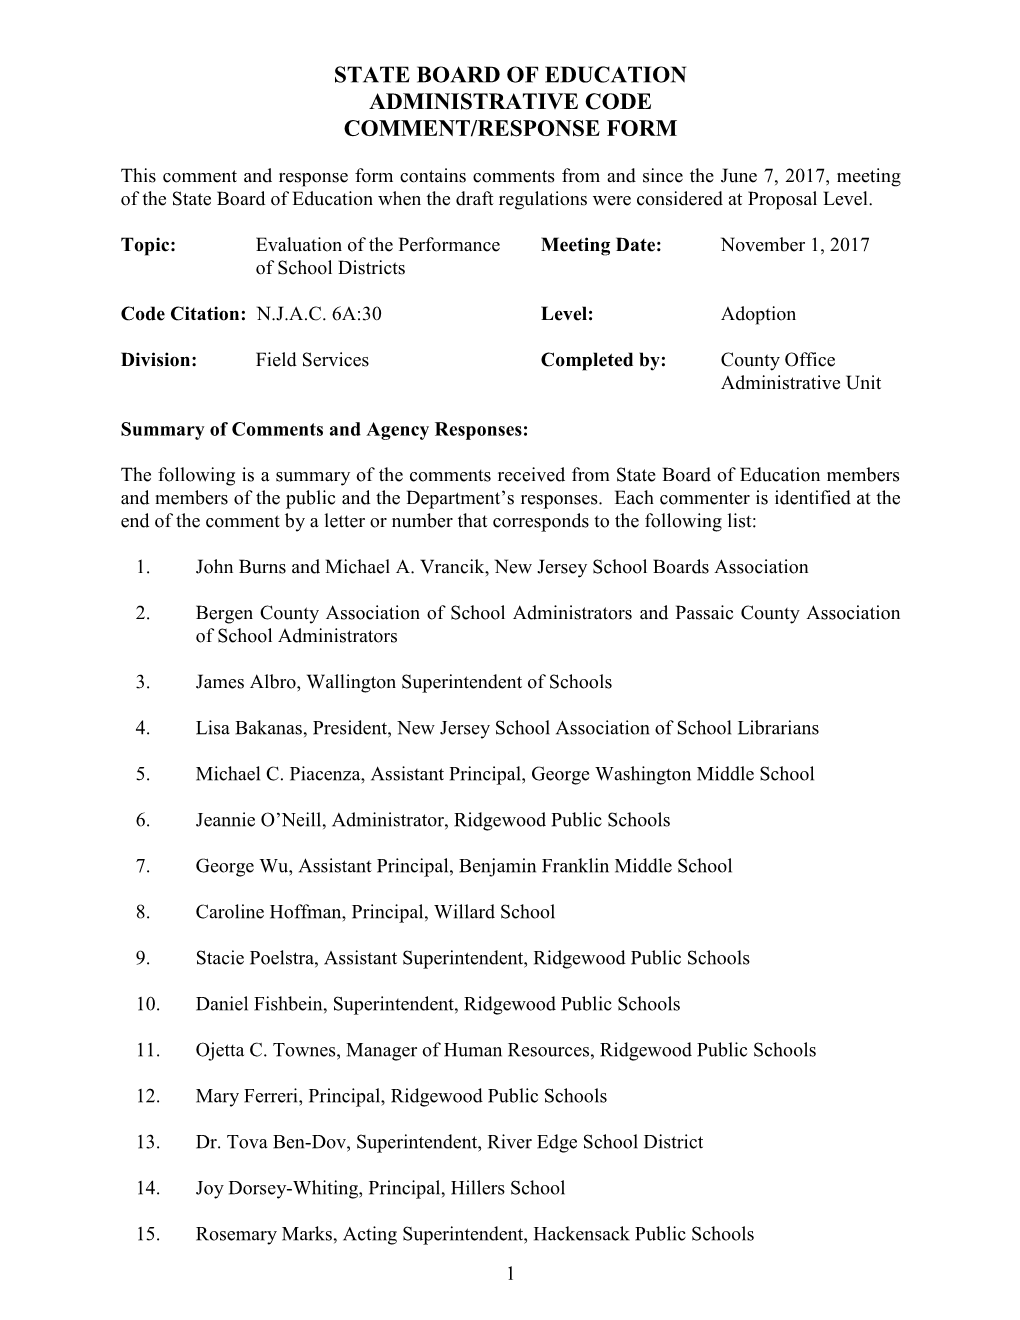 Item C Evaluation of the Performance of School Districts